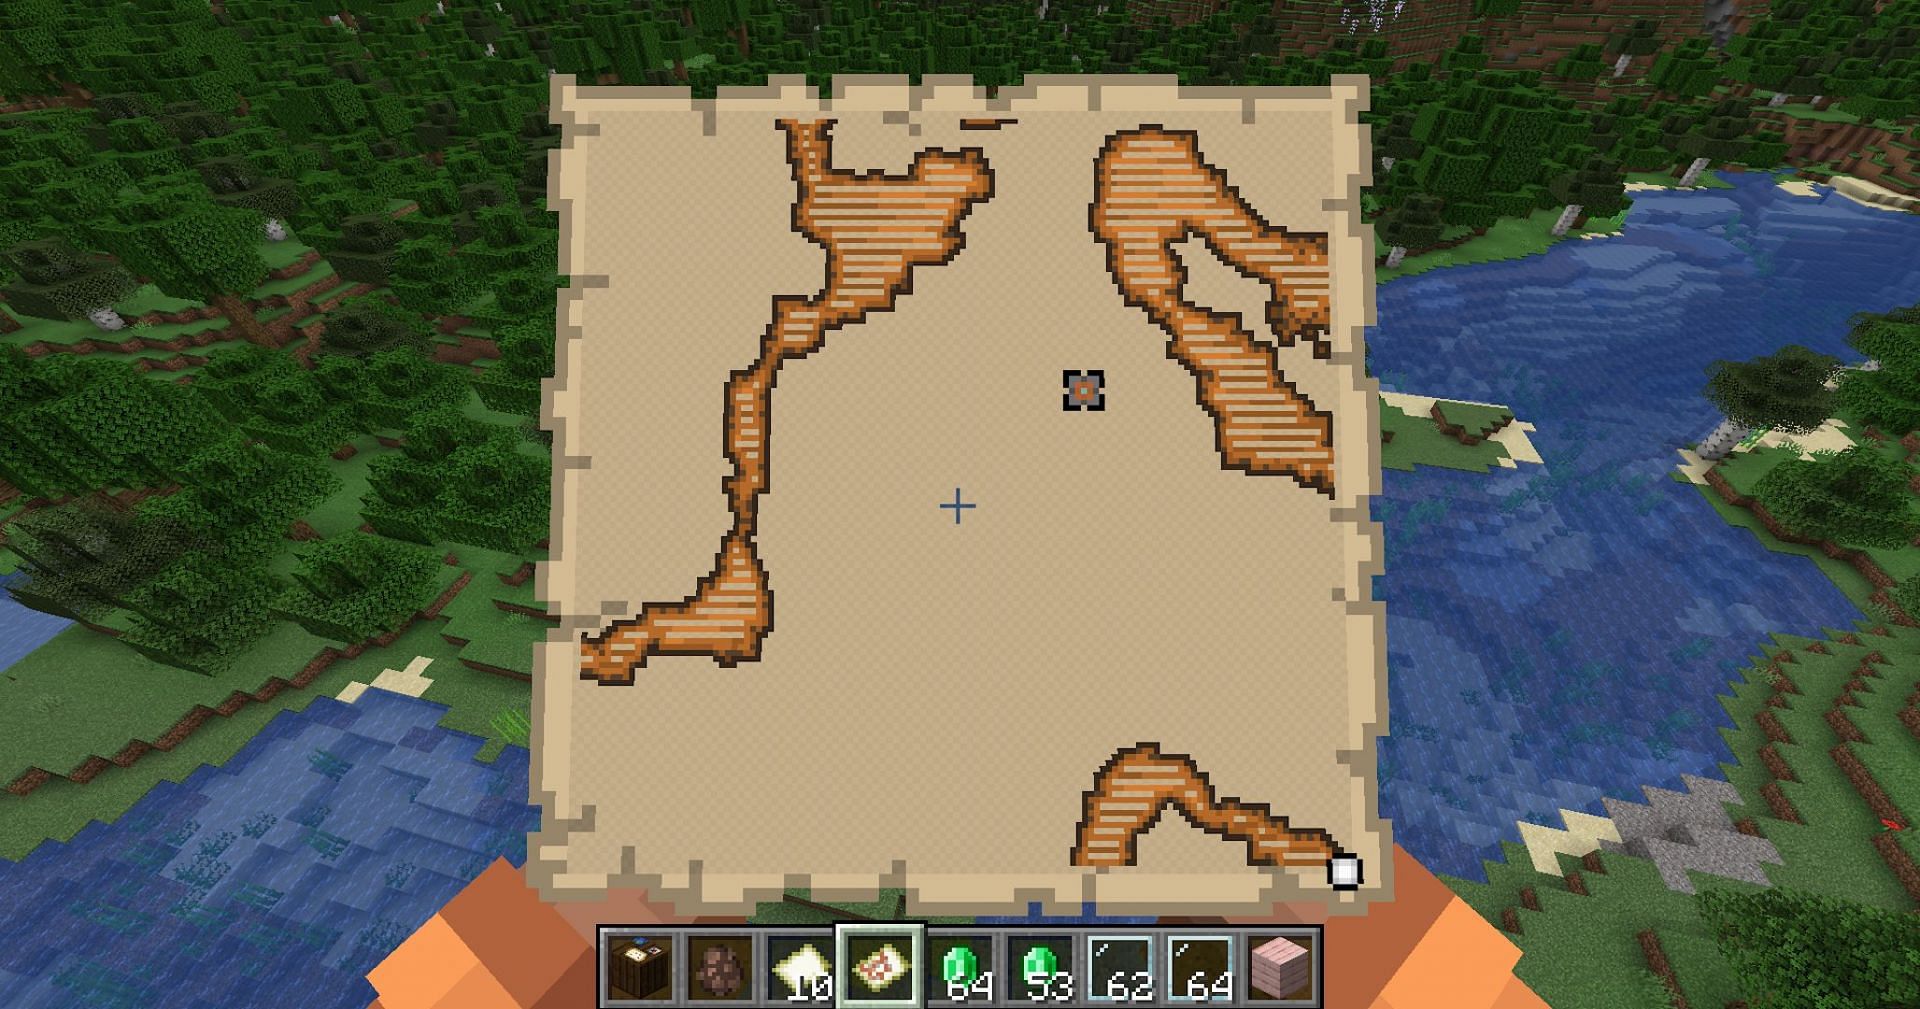 Maps make finding trial chambers a breeze, no pun intended (Image via Mojang)